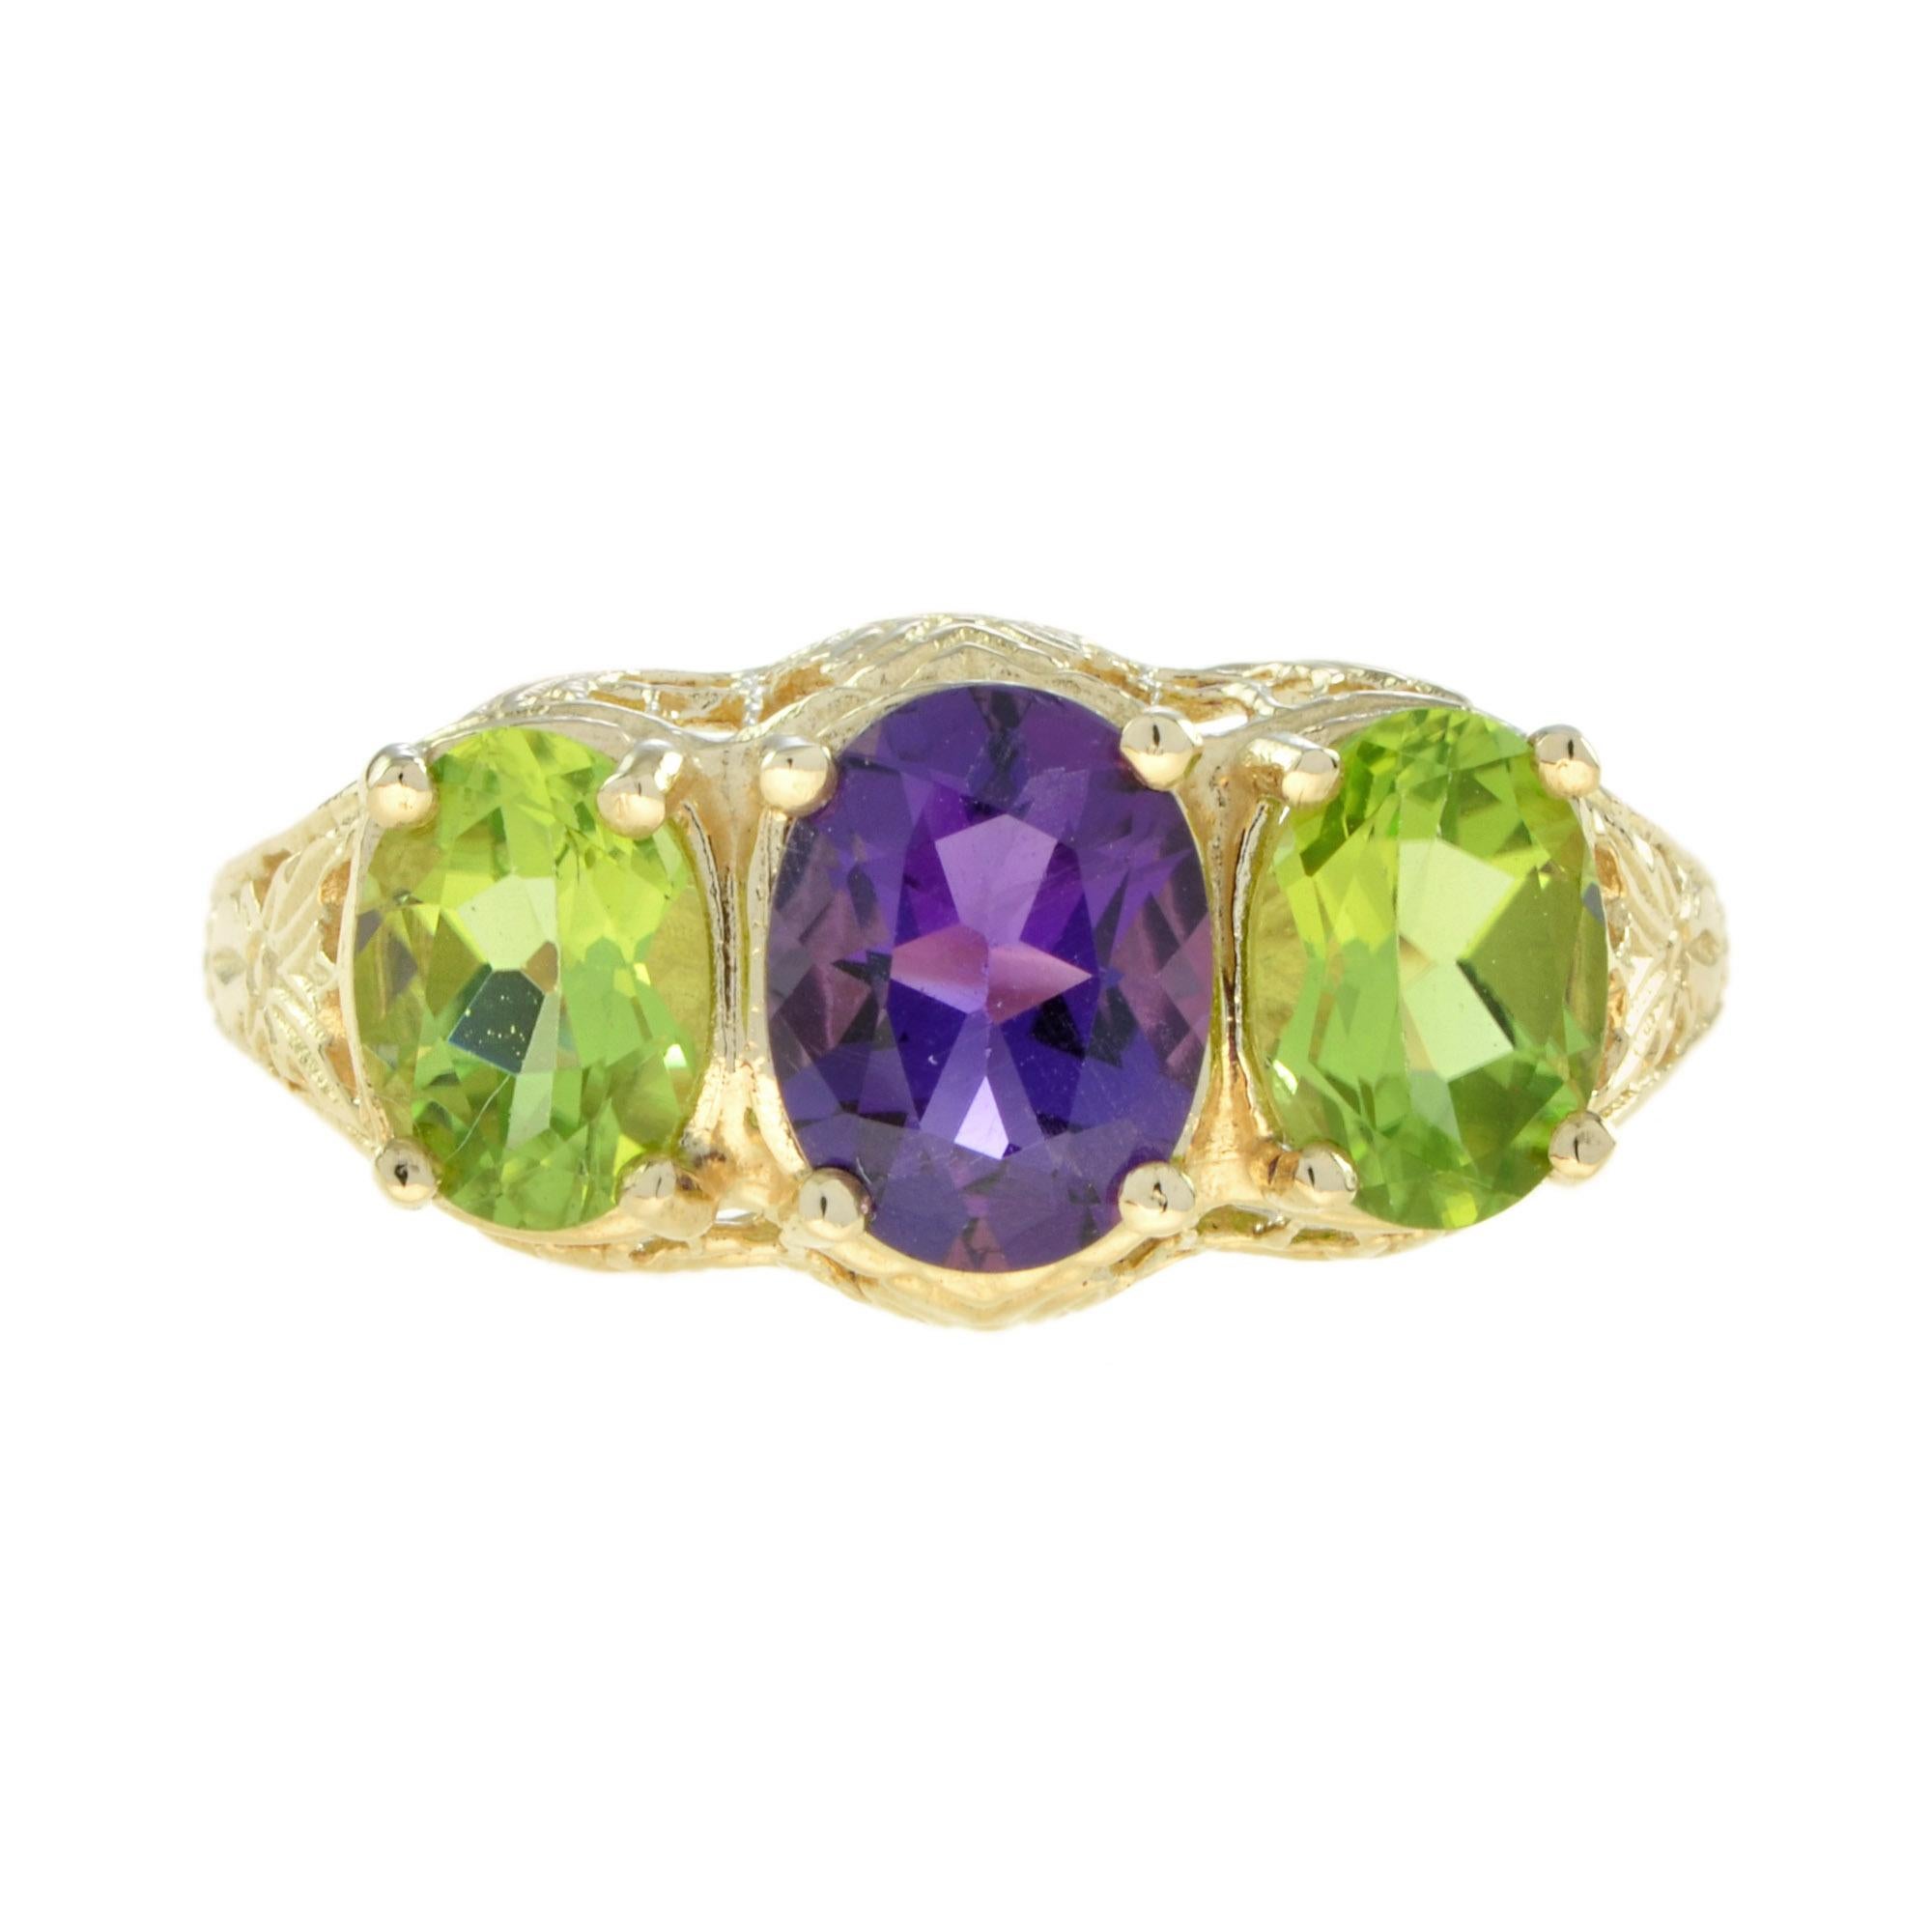 An Art Deco style filigree three stone ring with 8x6  mm. natural amethyst in the center and two 7x5 mm. natural peridot each side. Filigree rings are timeless in style and can be enjoyed, cherished and handed down as precious family